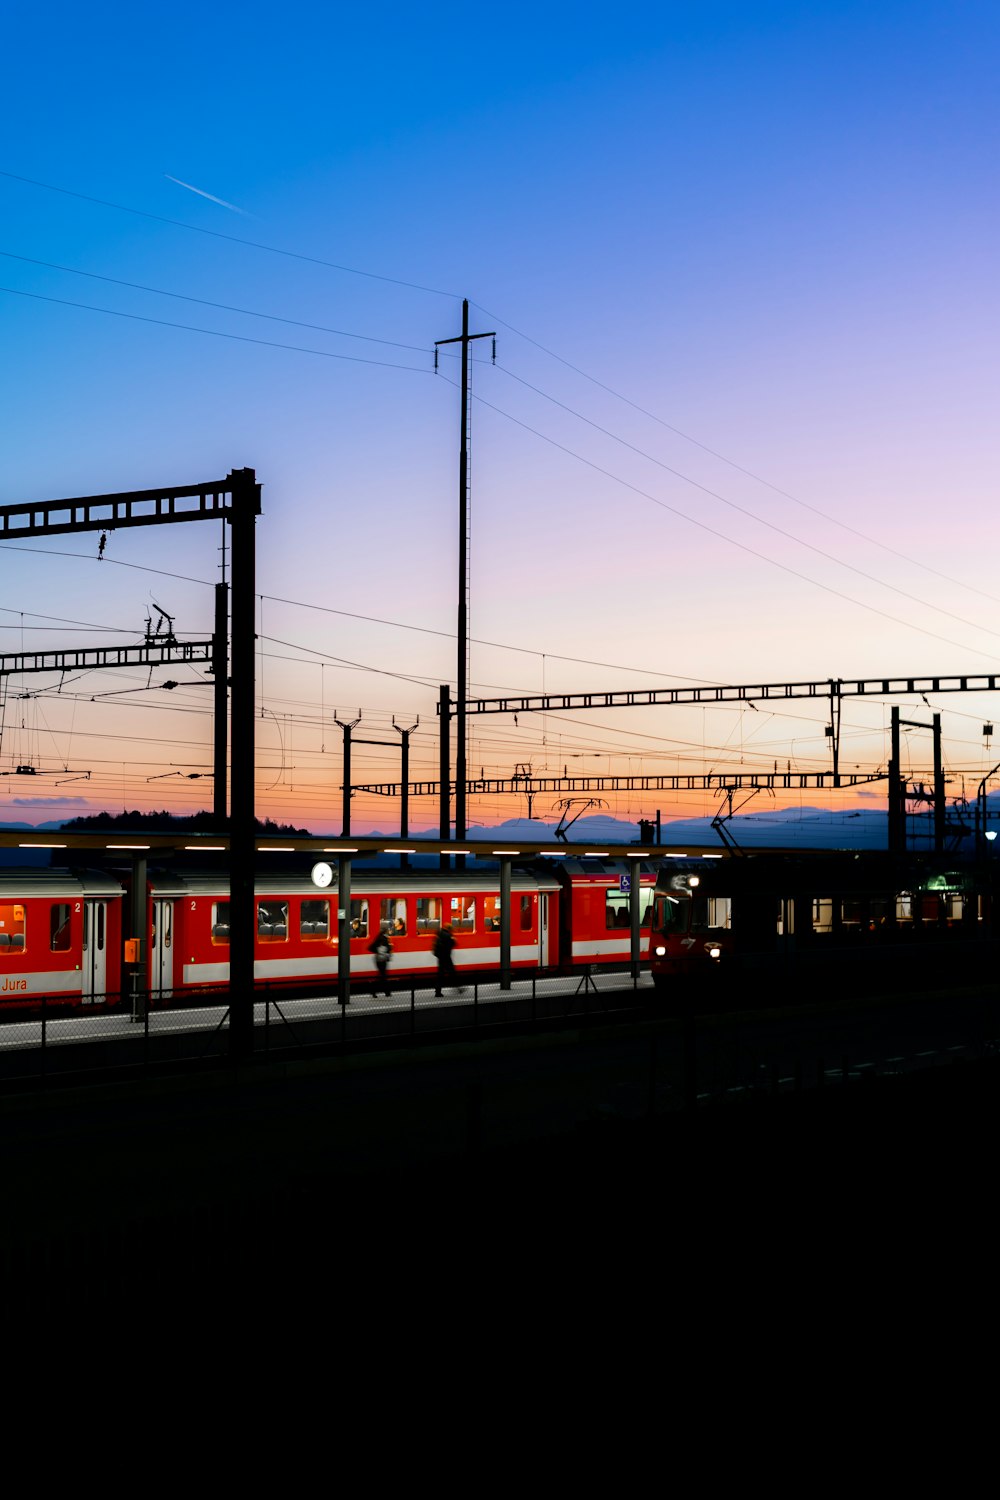 a red train traveling down train tracks at dusk